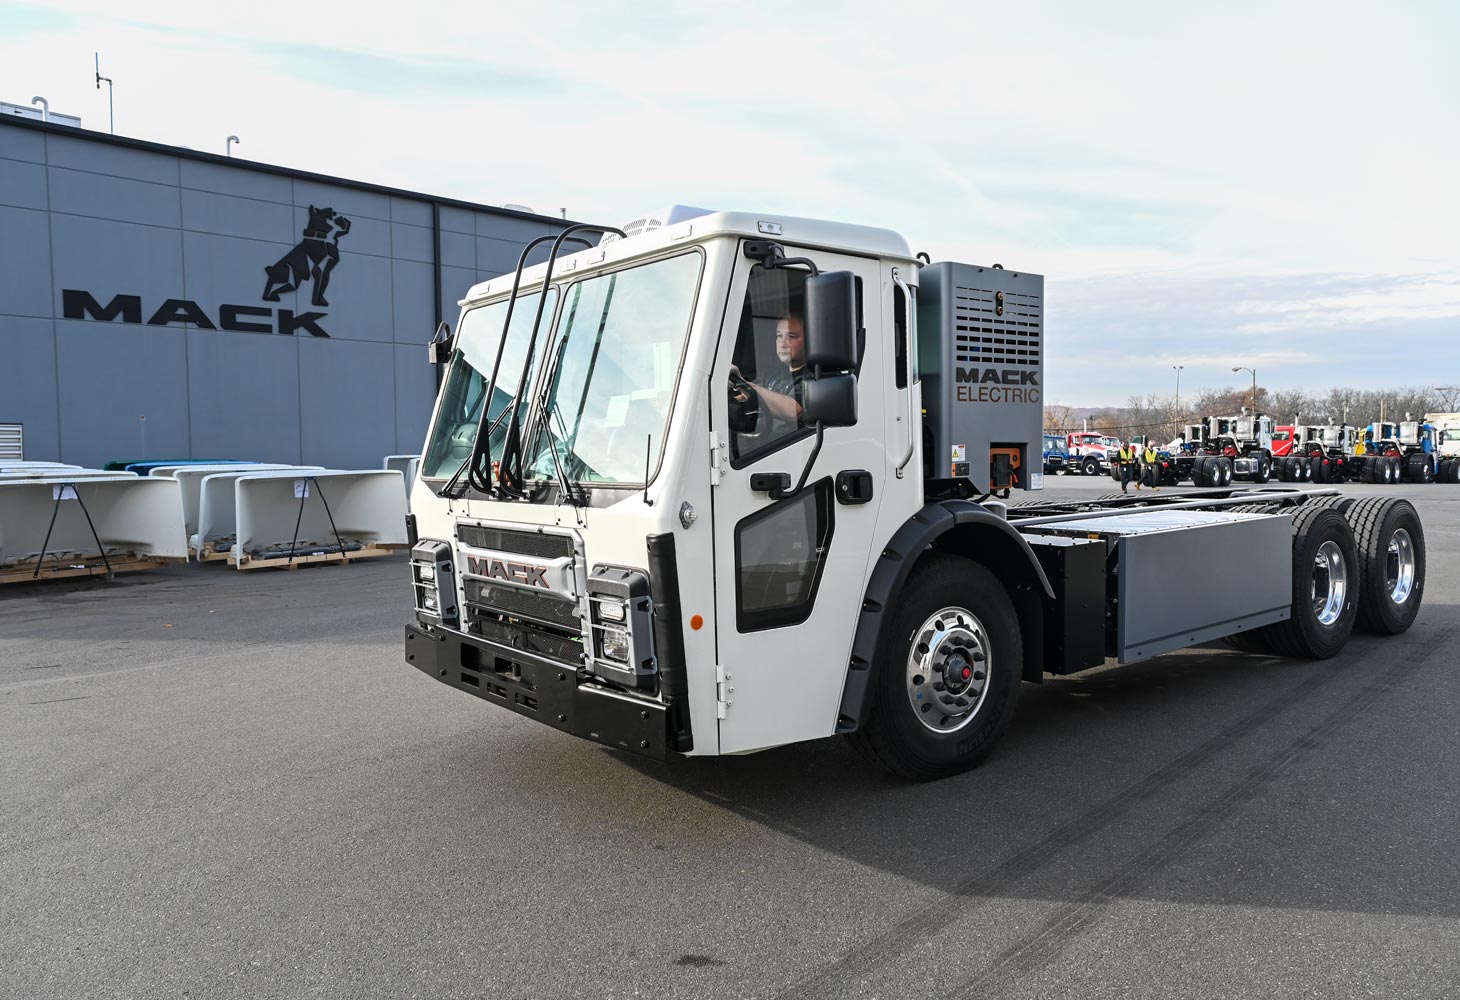 Mack introduces Vehicle-as-a-Service (VaaS) Program for BEVs